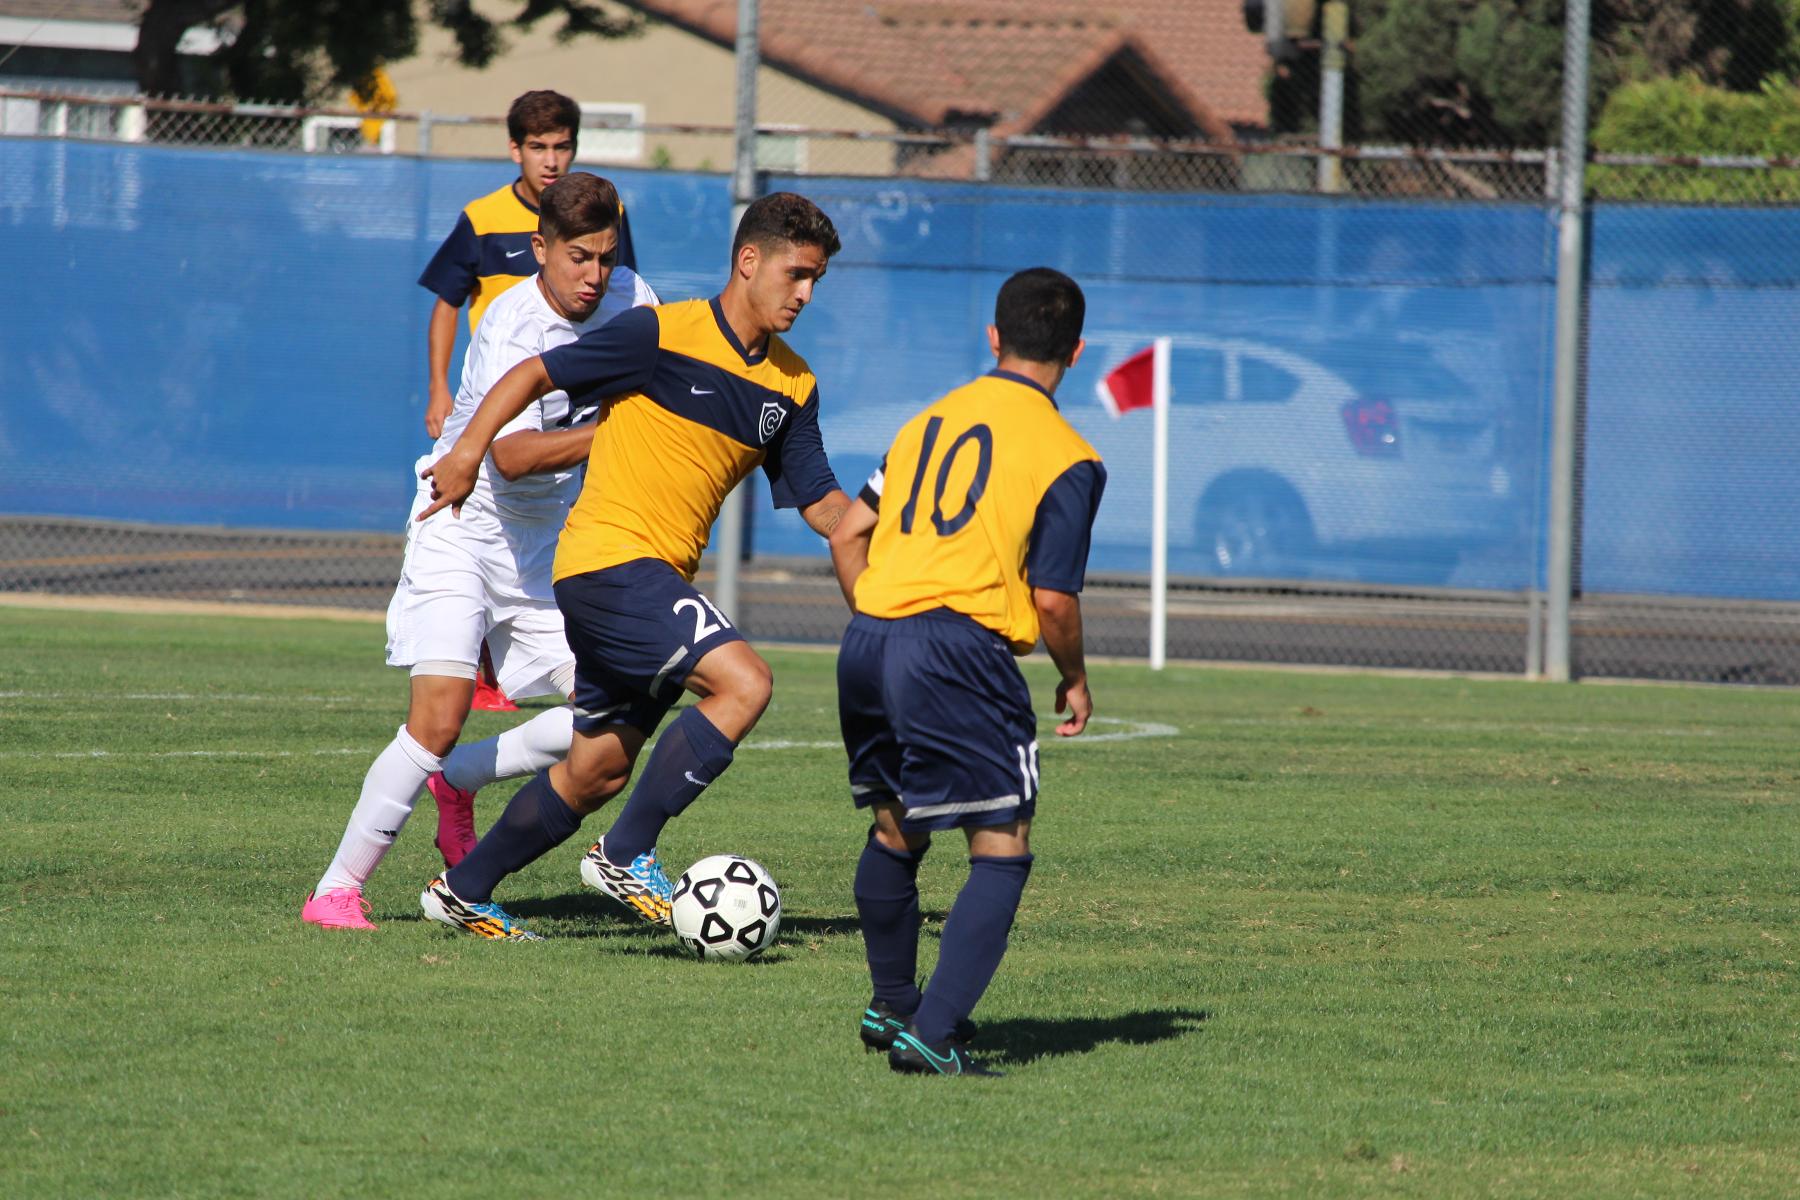 Chargers Fall 2-1 in Conference Opener